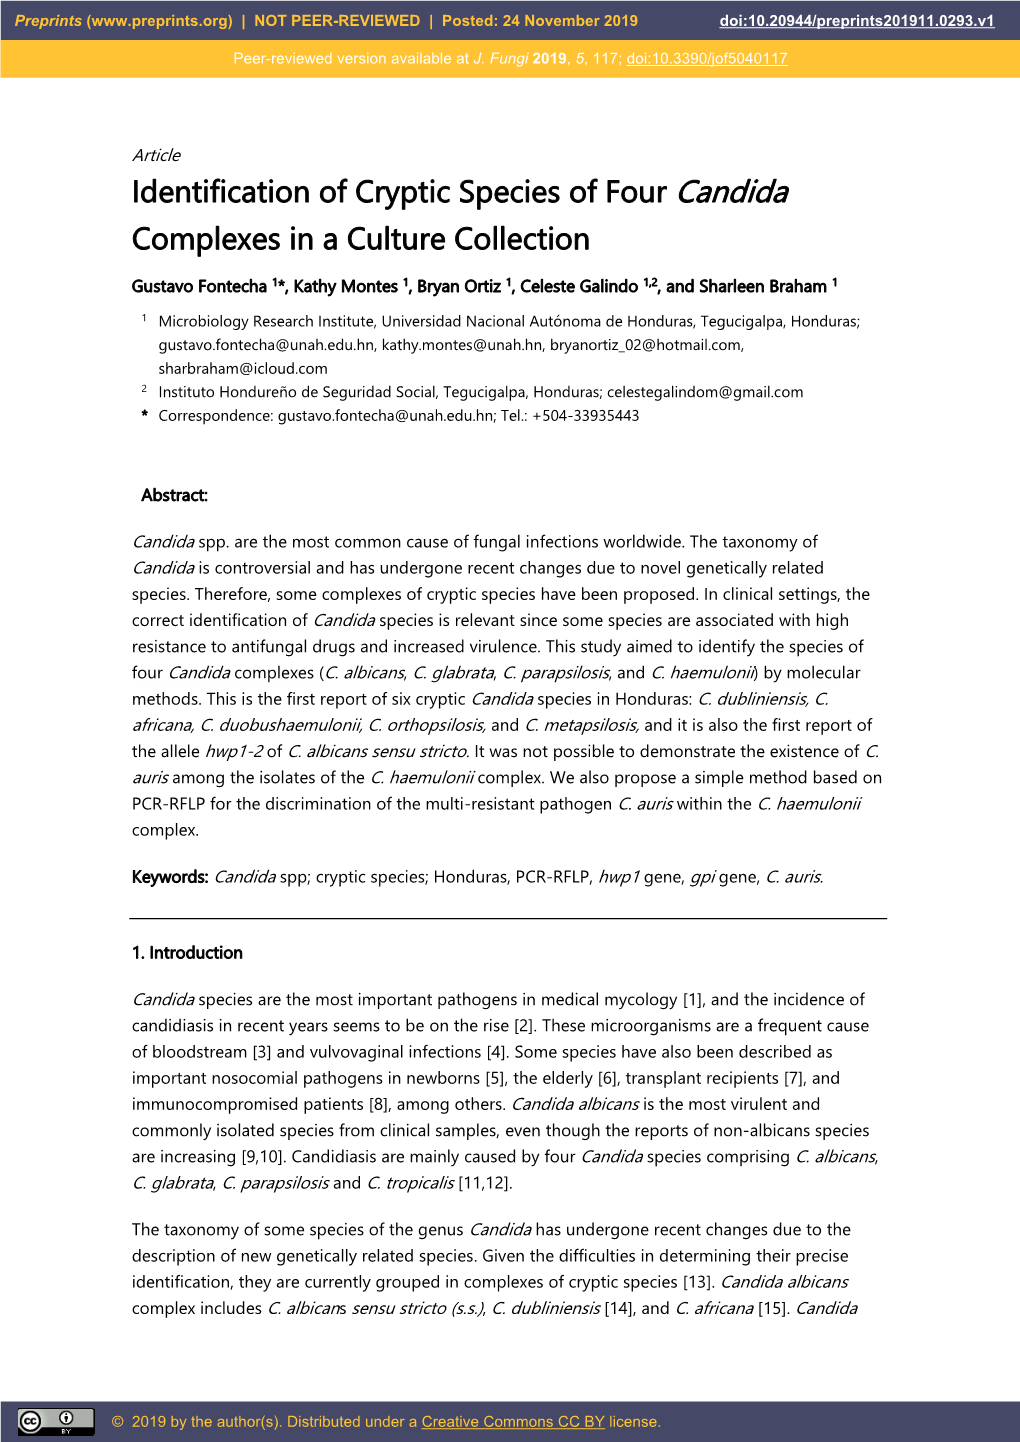 Identification of Cryptic Species of Four Candida Complexes in a Culture Collection